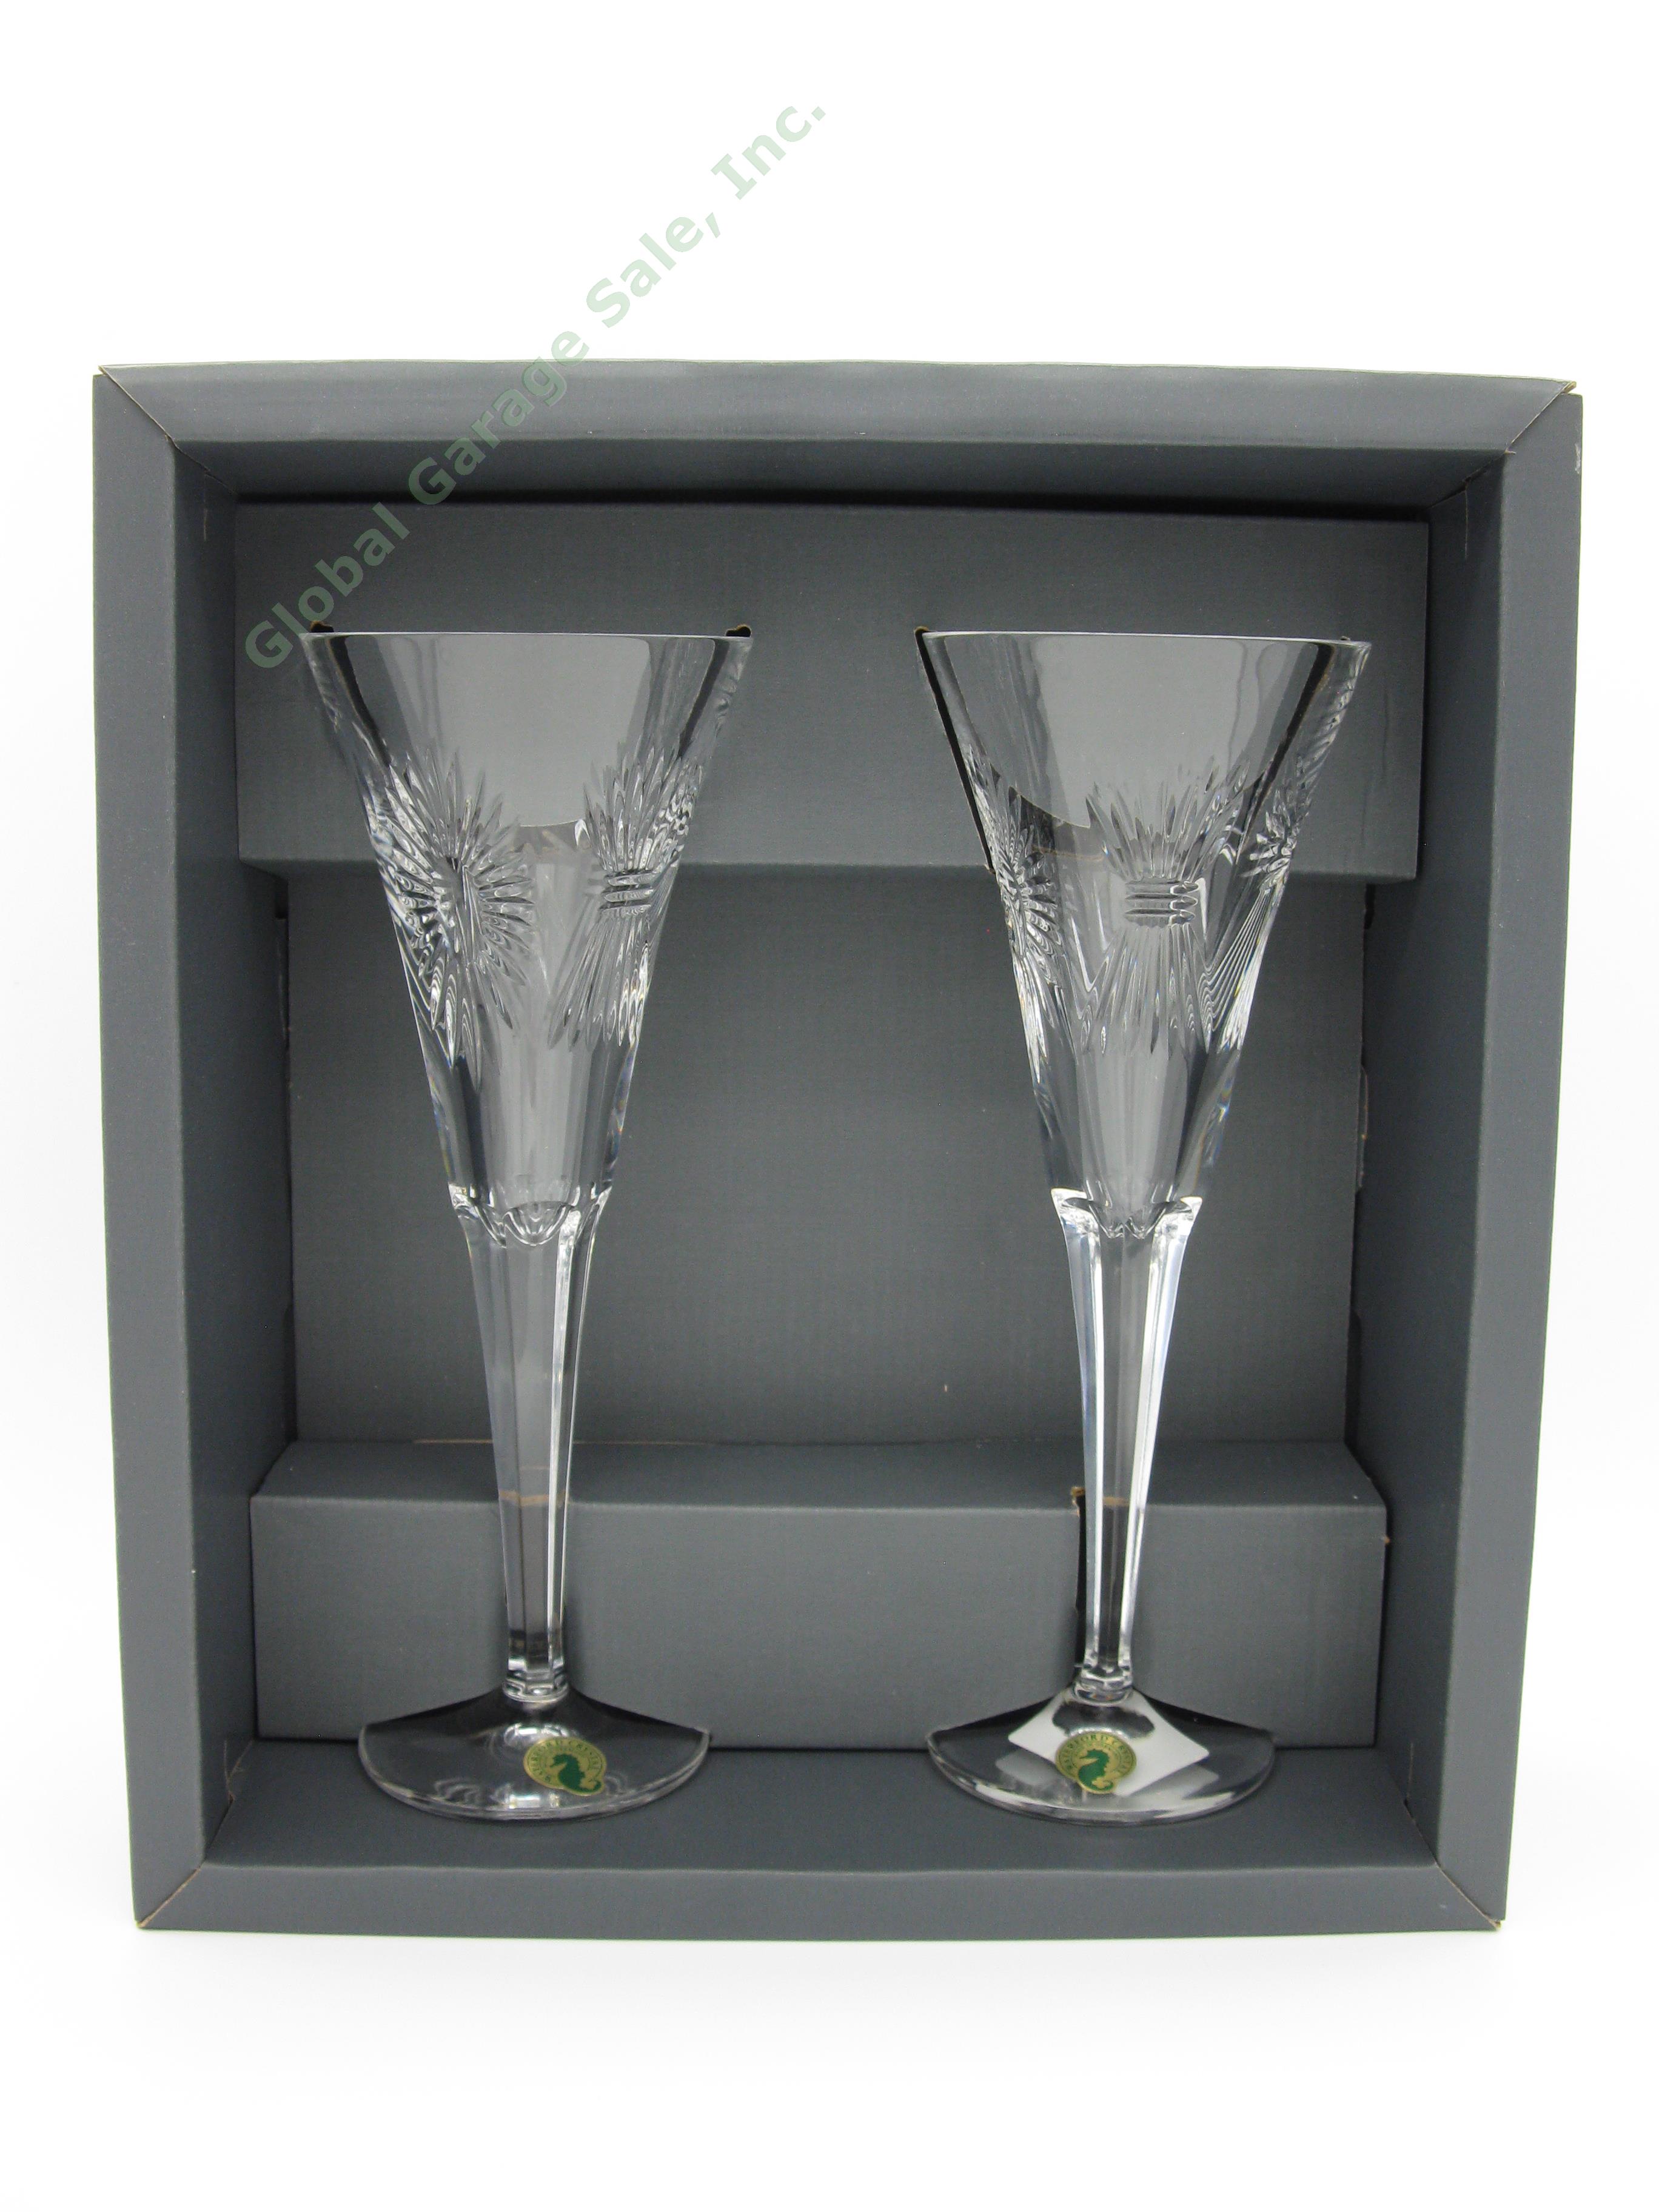 4 Waterford Crystal Millennium Universal-5 Toasting Flute Champagne Glasses NR! 11